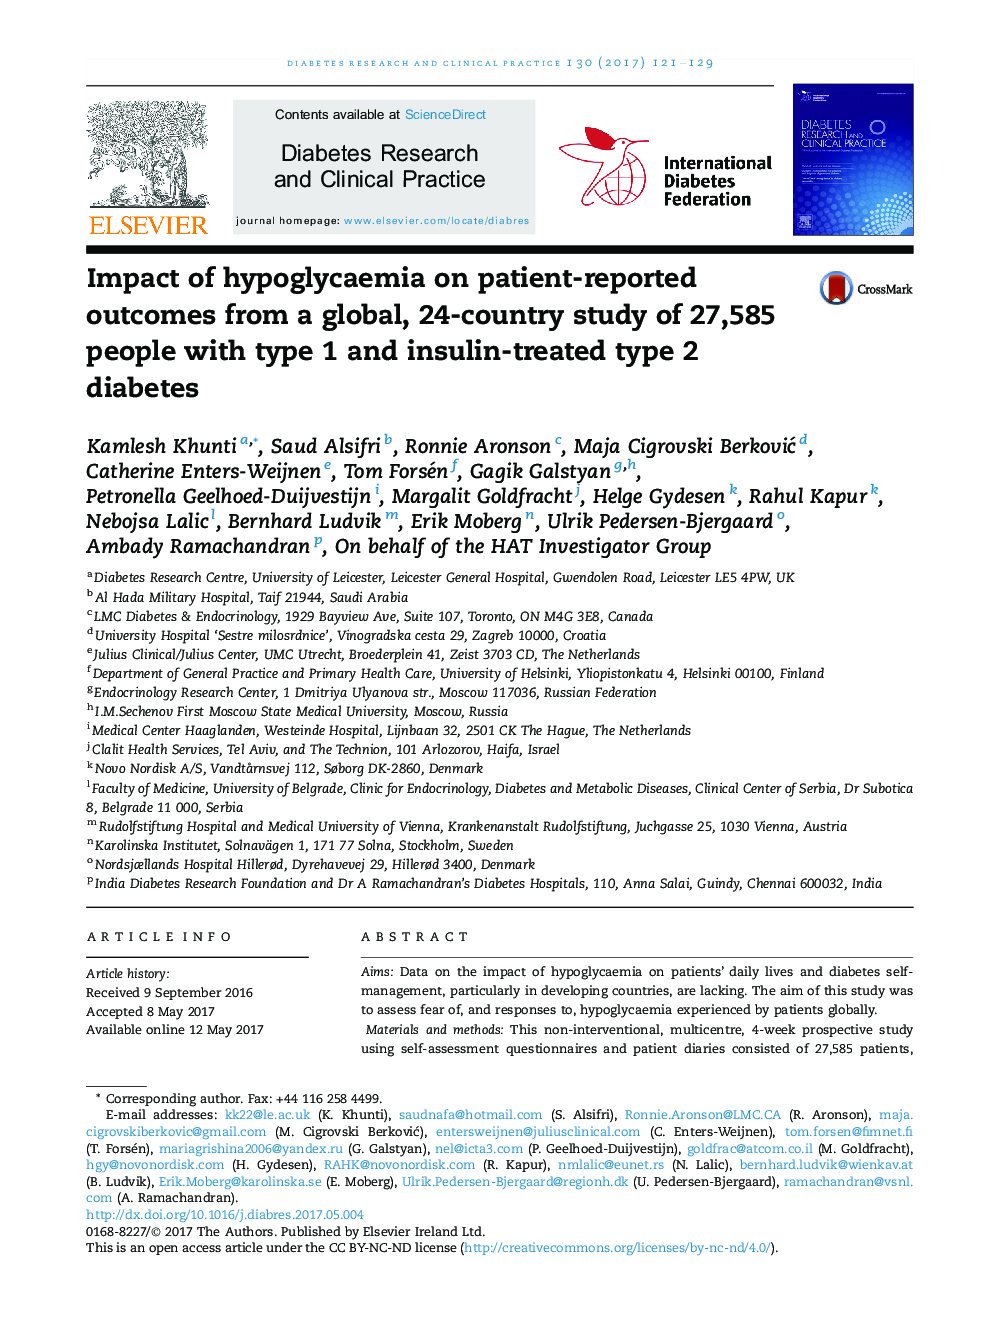 Impact of hypoglycaemia on patient-reported outcomes from a global, 24-country study of 27,585 people with type 1 and insulin-treated type 2 diabetes